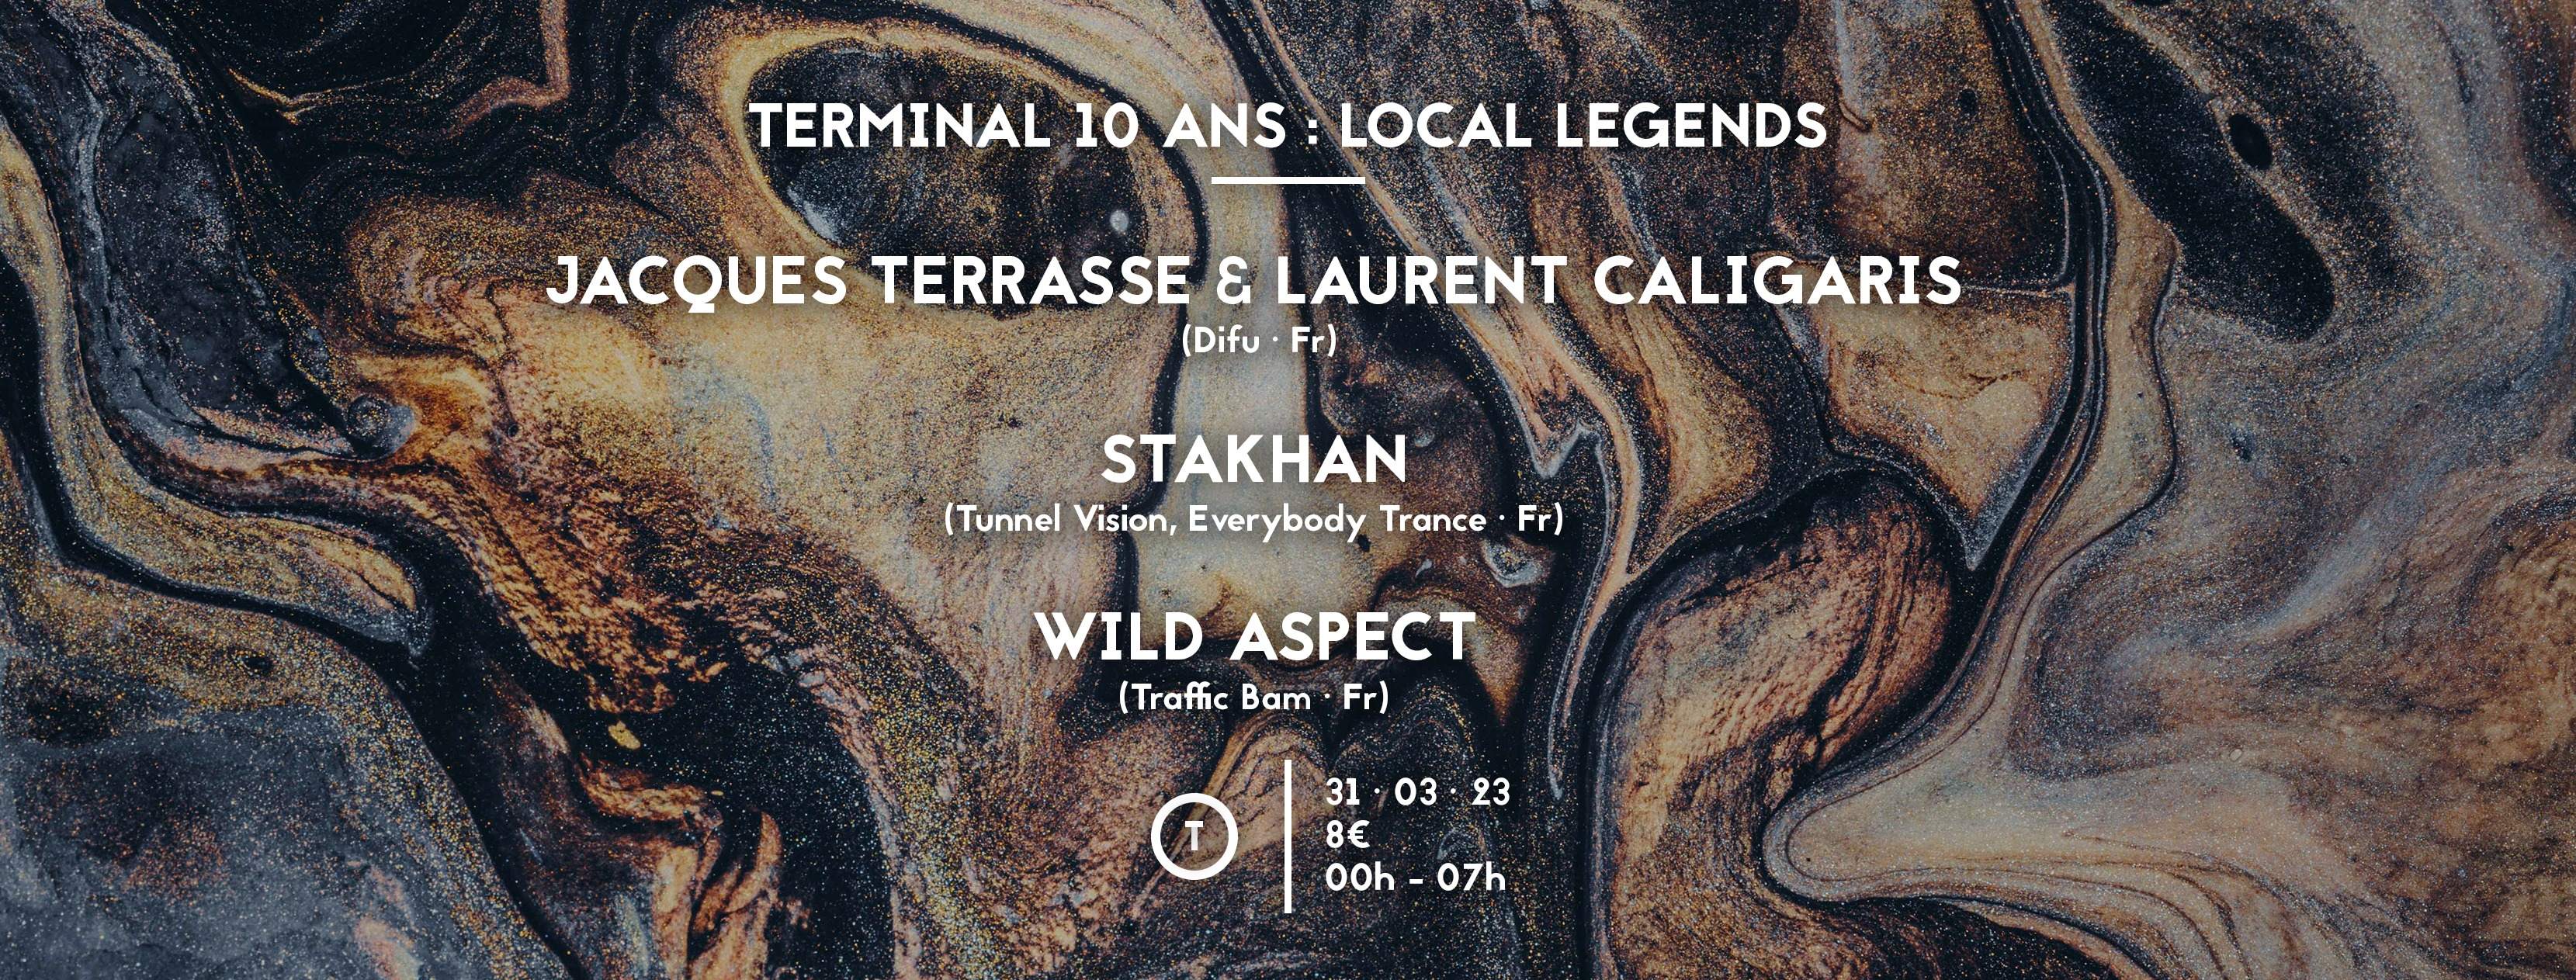 Terminal '10 ans - Local Legends': Jacques Terrasse & Laurent Caligaris, Stakhan, Wild Aspect - フライヤー表